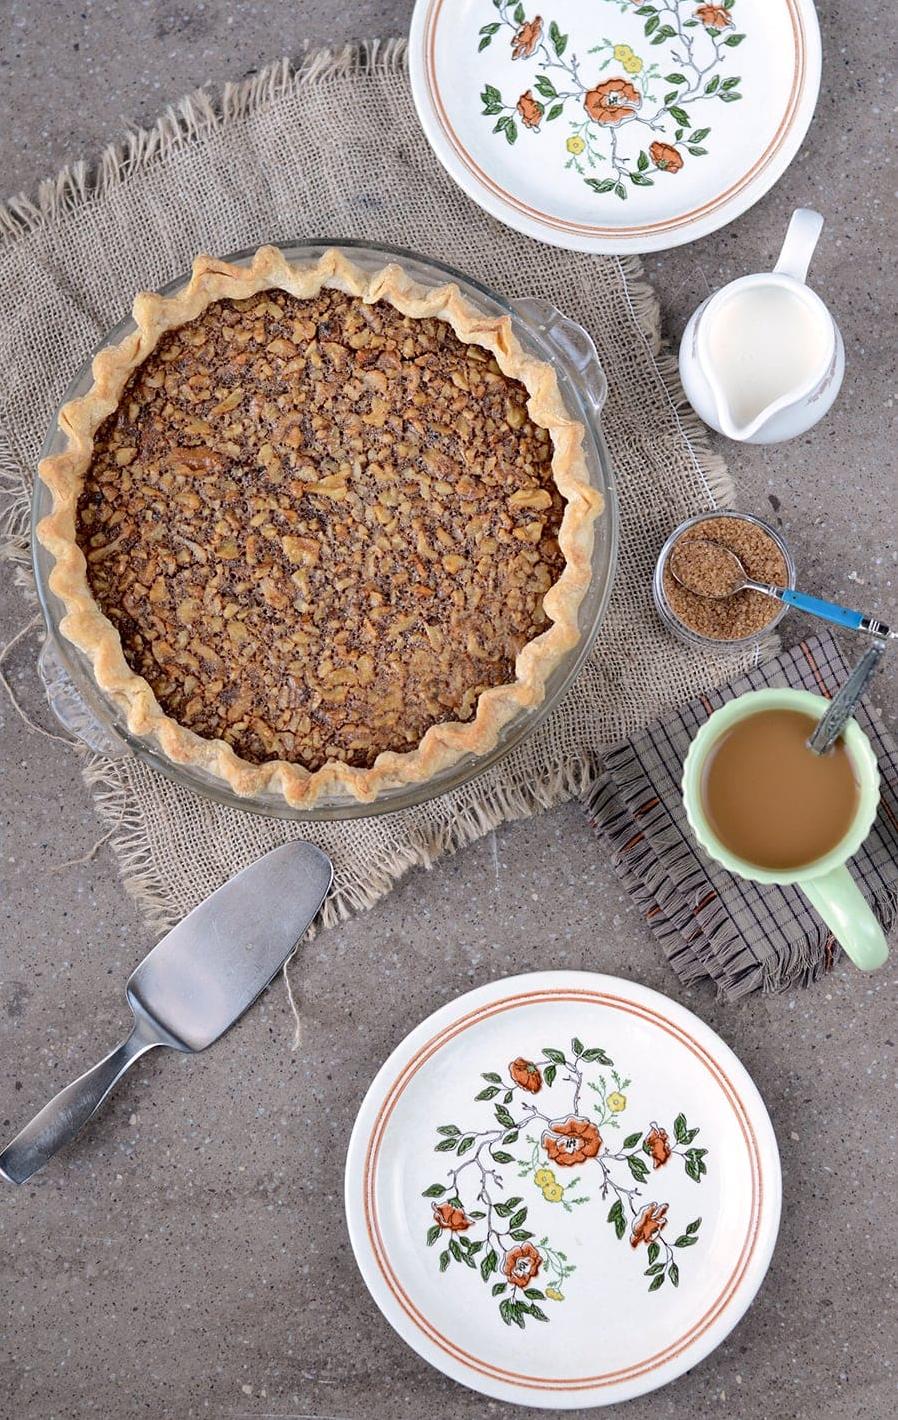  This pie is a game-changer for those who are dairy-free.